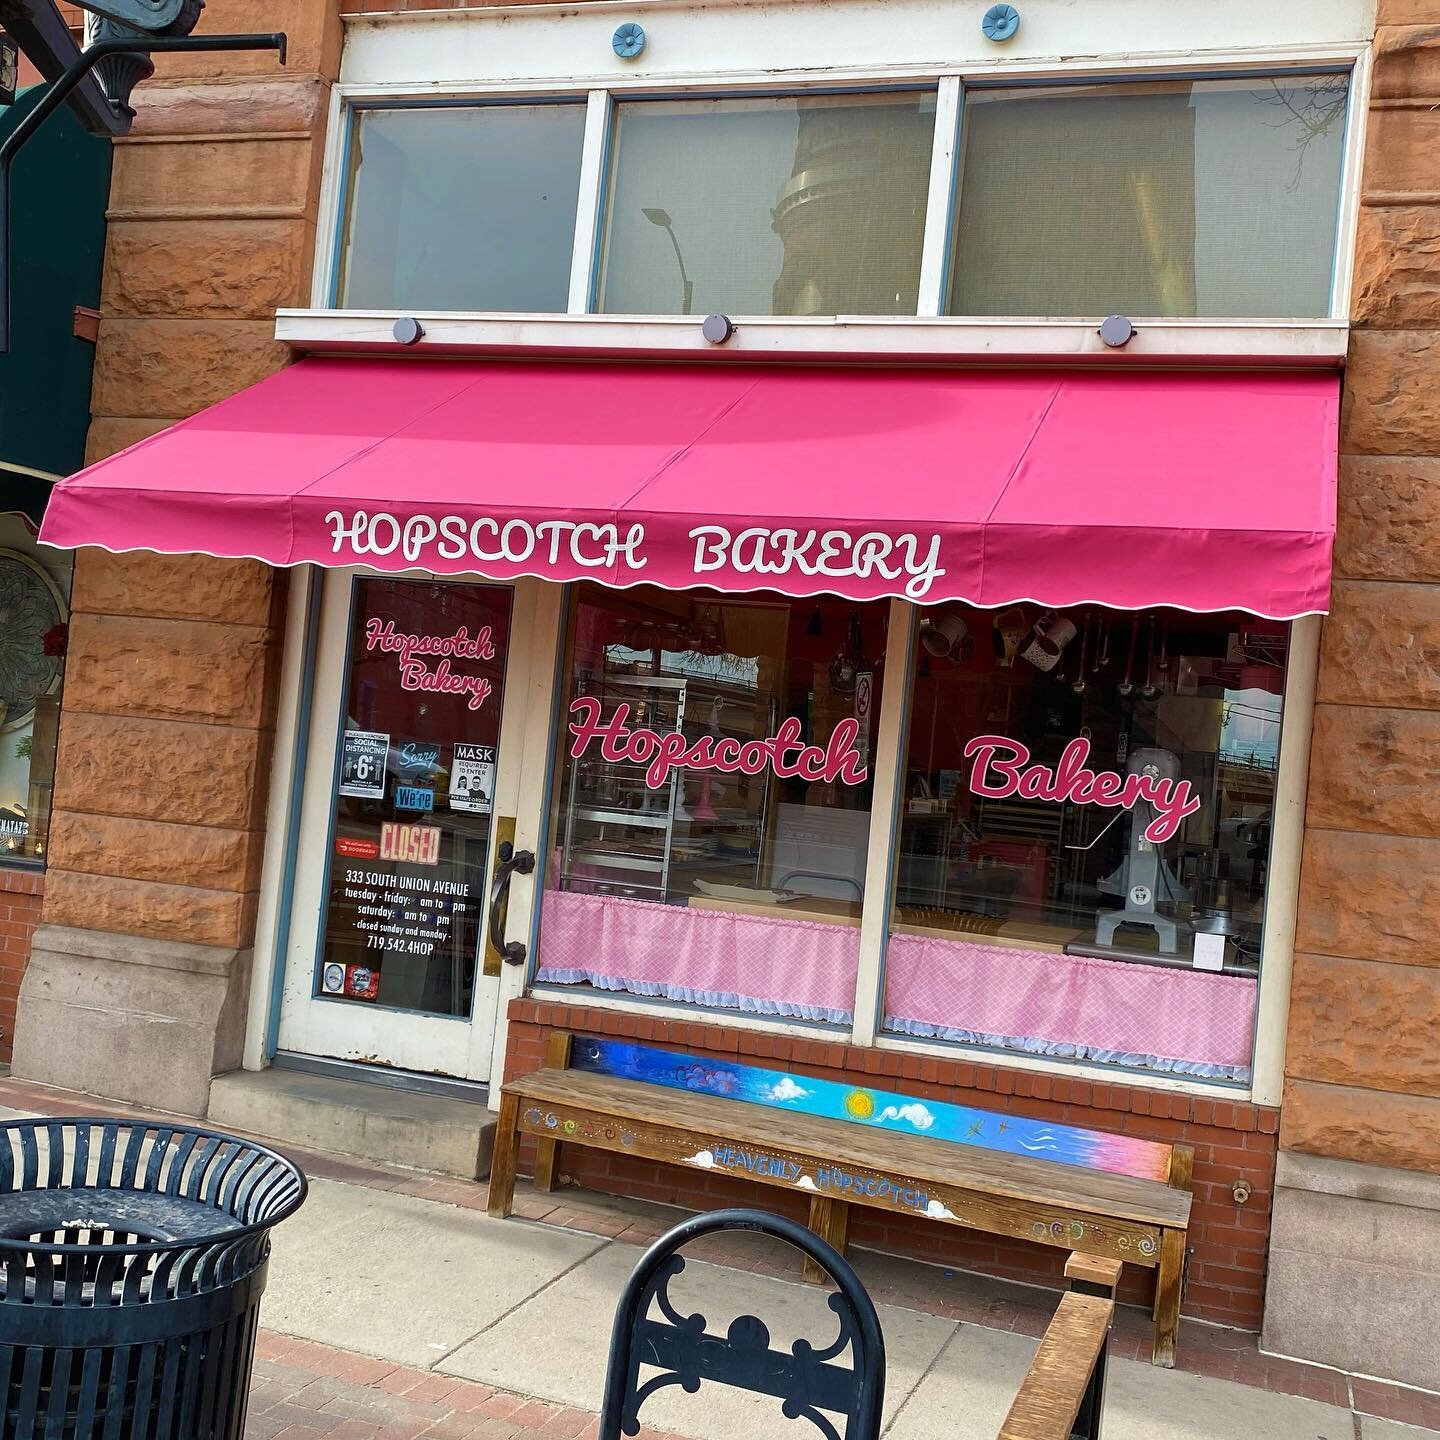 The next time you need a sweet treat be sure to stop by Hopscotch Bakery! 

#aztecmfg#storefrontawnings#canvasawnings#steelawnings#awnings#awningsandcanopies#canopies#canvascanopies#1shot#1shotpaint#1shotletteringenamel#handpaintedsigns#puebloco#down